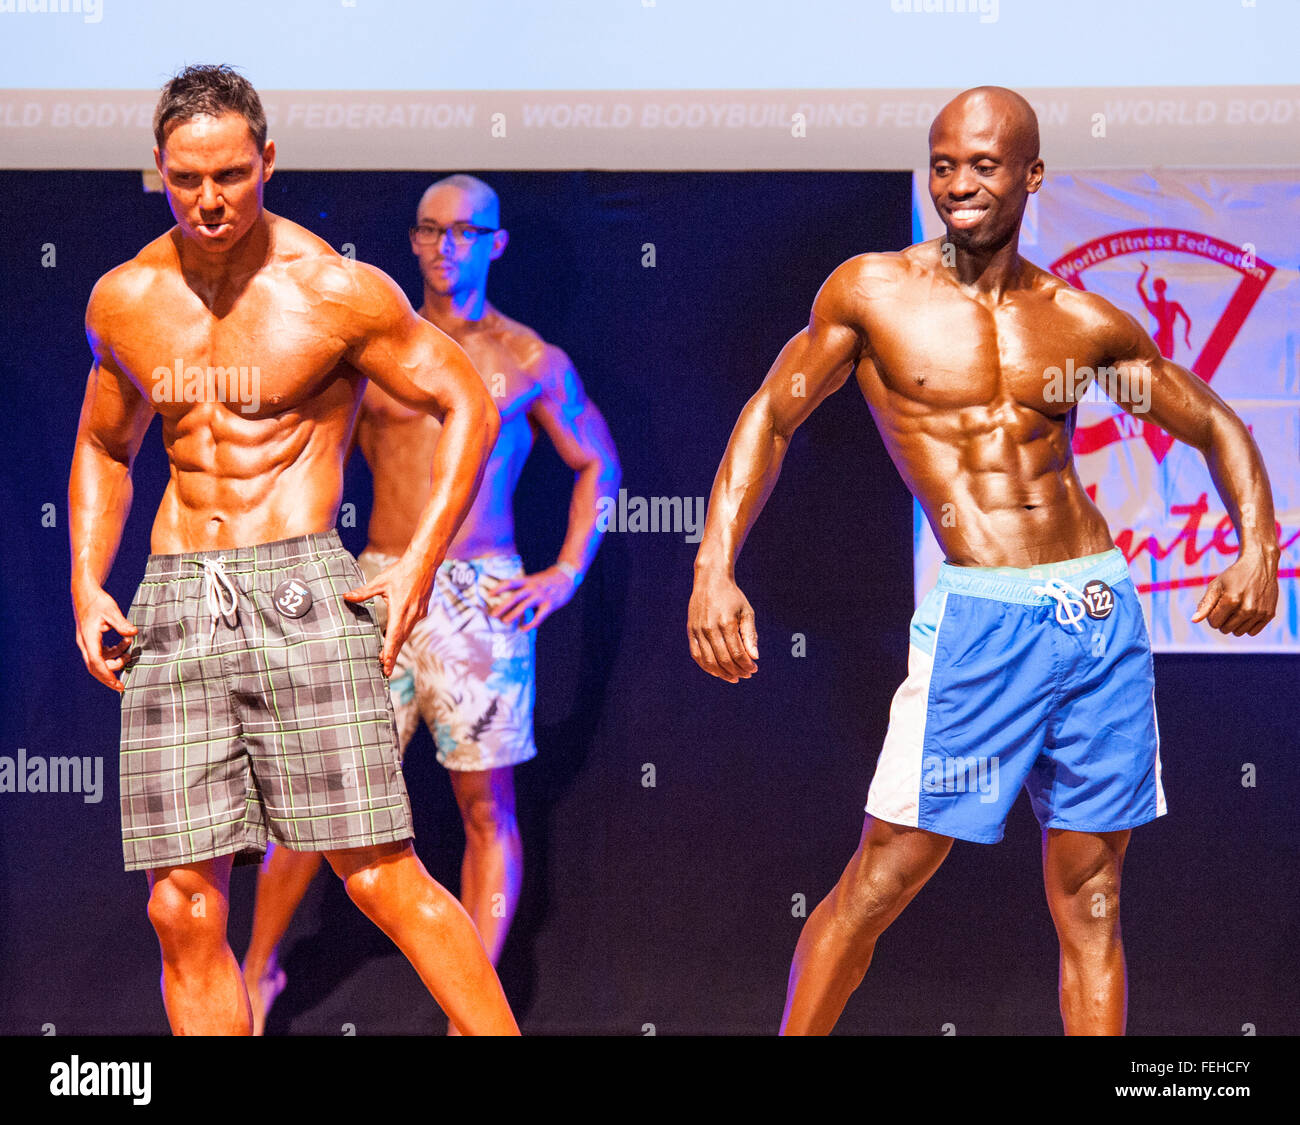 MAASTRICHT, THE NETHERLANDS - OCTOBER 25, 2015: Male physique model John Black and other competitiors show their best side pose Stock Photo